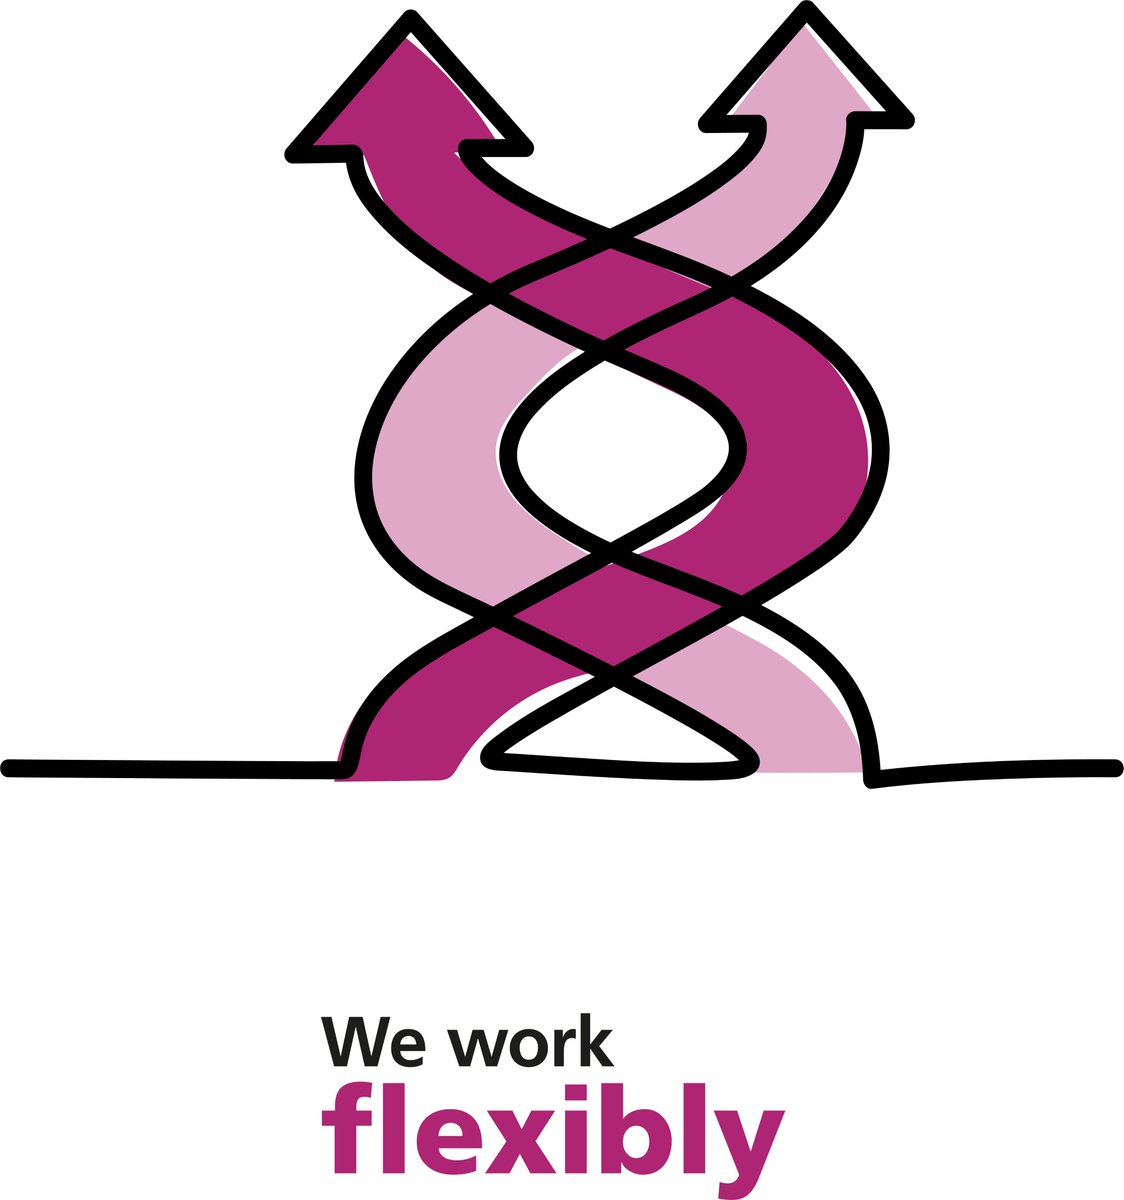 'We Work Flexibly' is a key priority of the #NHSLongTermWorkforcePlan, NHS England's flexible working policy framework, supports you to have conversations and take steps towards working in a way that suits you best. Read it here: bit.ly/3xw7jJe